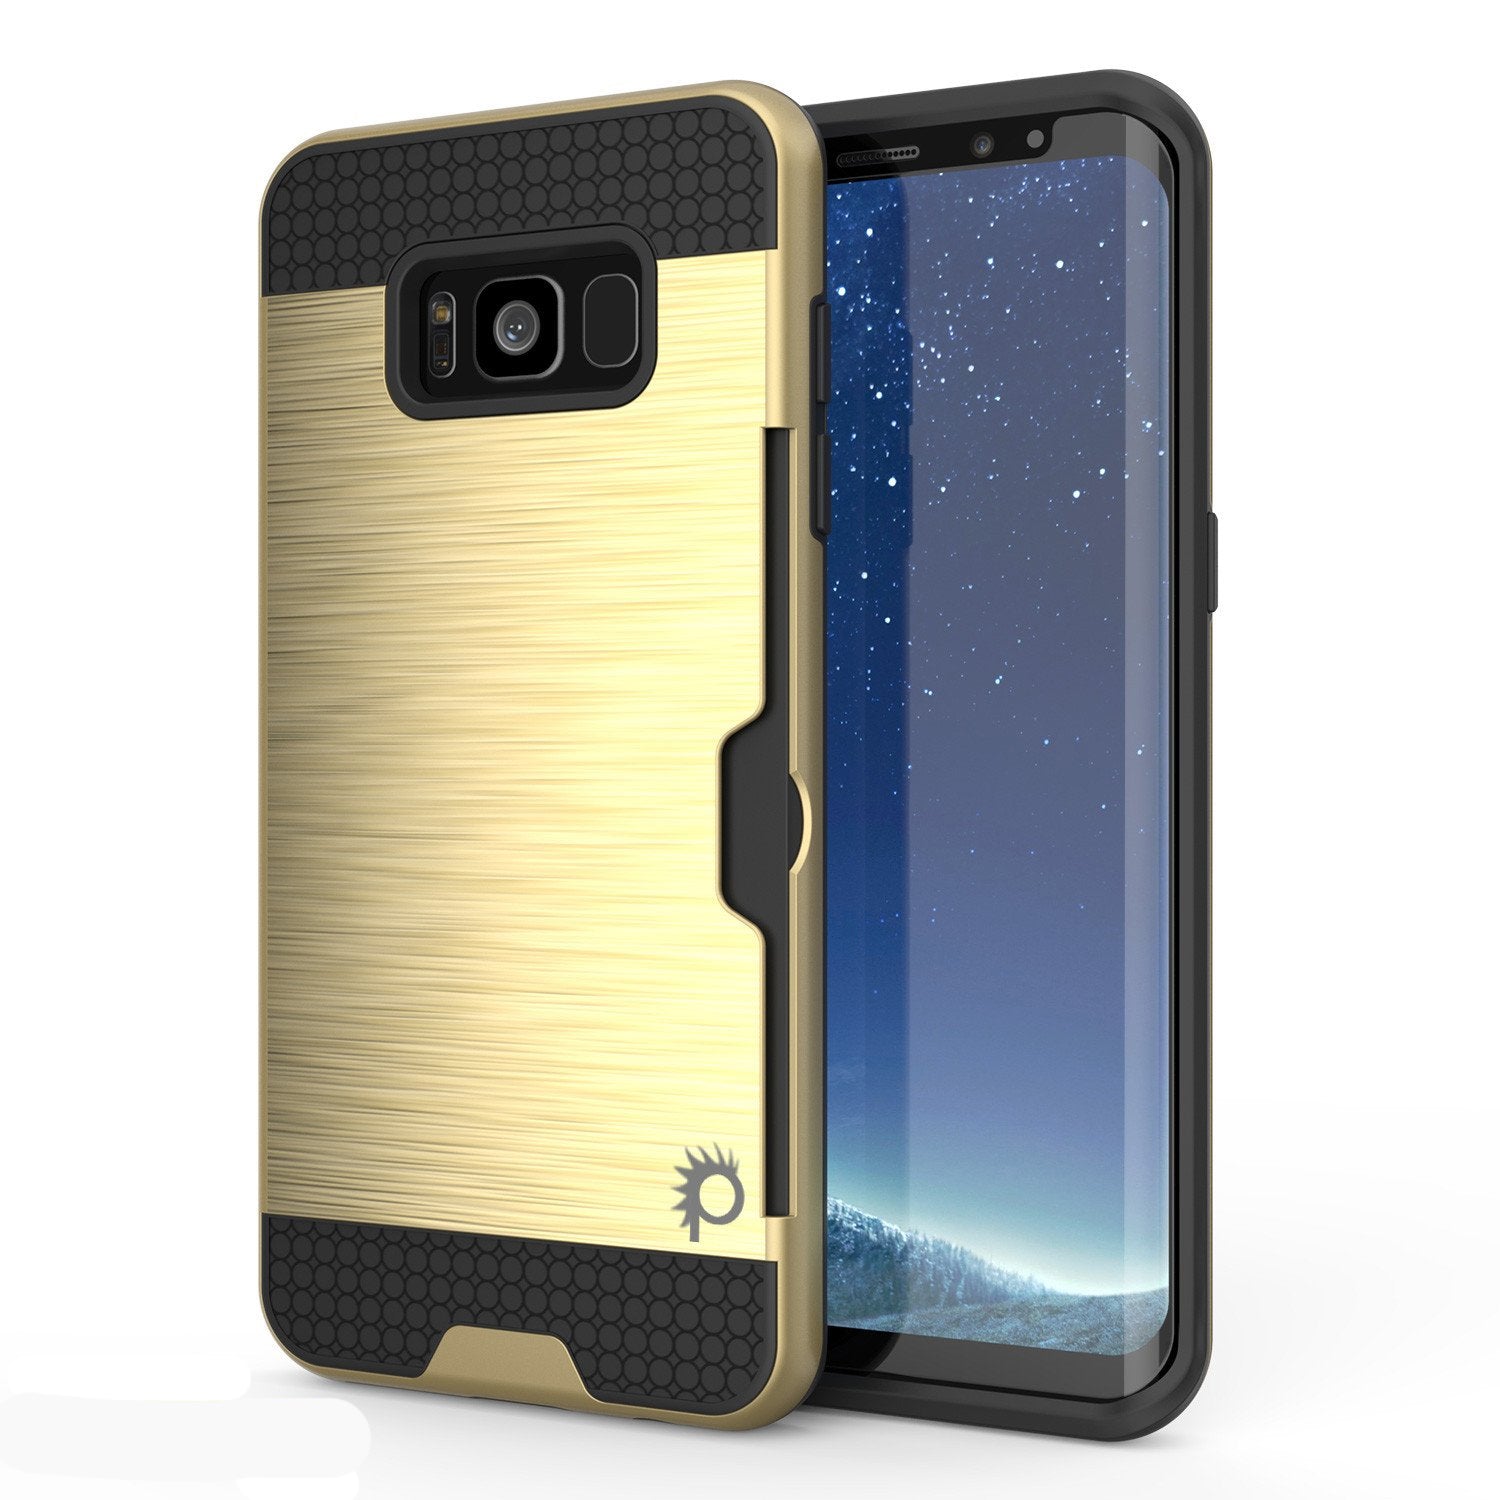 Galaxy S8 Plus Case, PUNKcase [SLOT Series] [Slim Fit] Dual-Layer Armor Cover w/Integrated Anti-Shock System, Credit Card Slot [Gold] (Color in image: Gold)